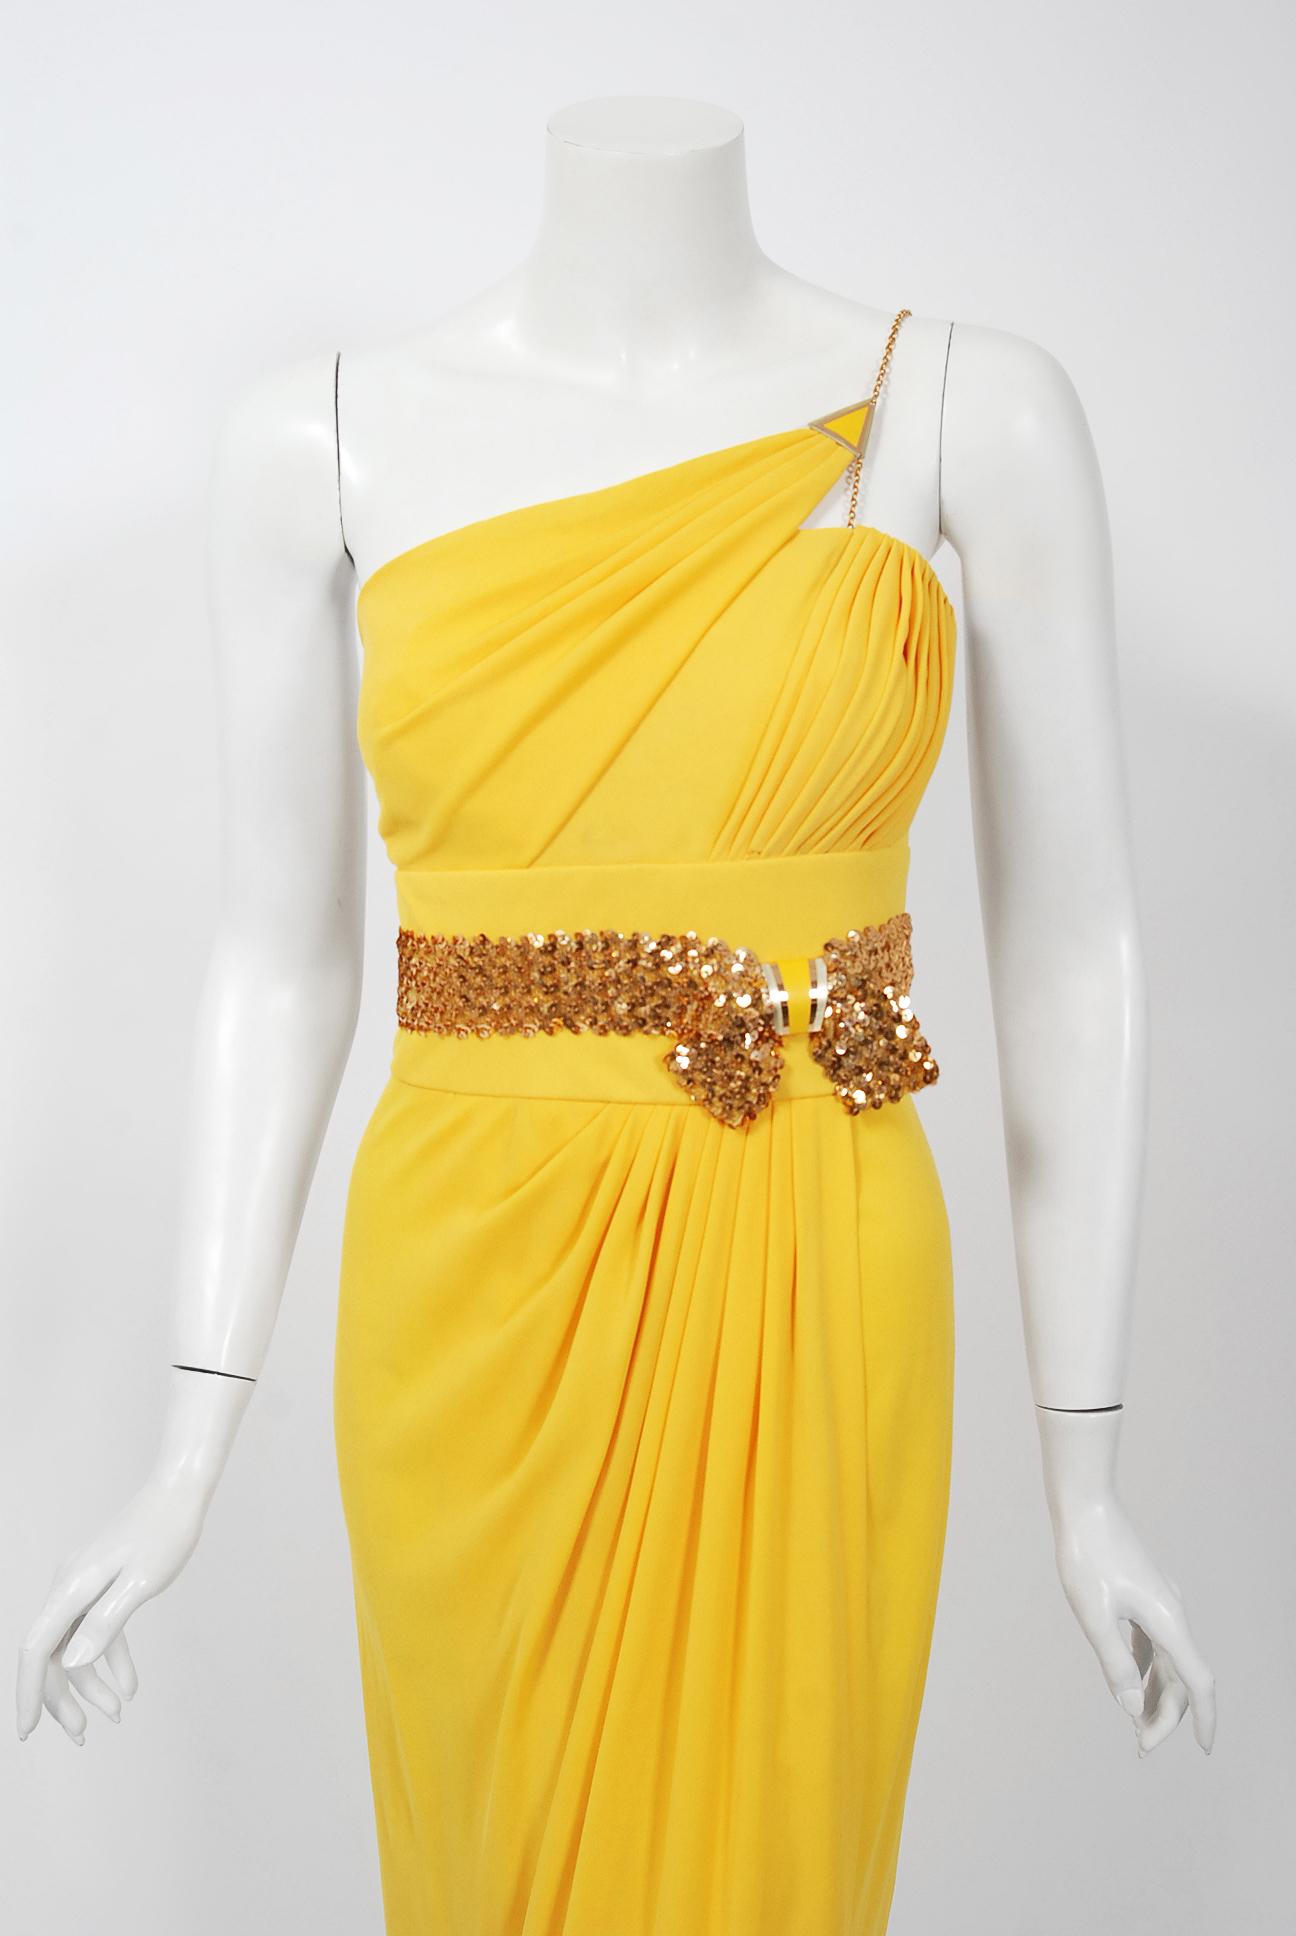 A breathtaking and hard to find Jacques Cassia Couture vibrant yellow dress dating back to the late 1970's. Though his work has only recently begun to be appreciated, Lebanese designer Jacques Cassia was a familiar face among fashionable